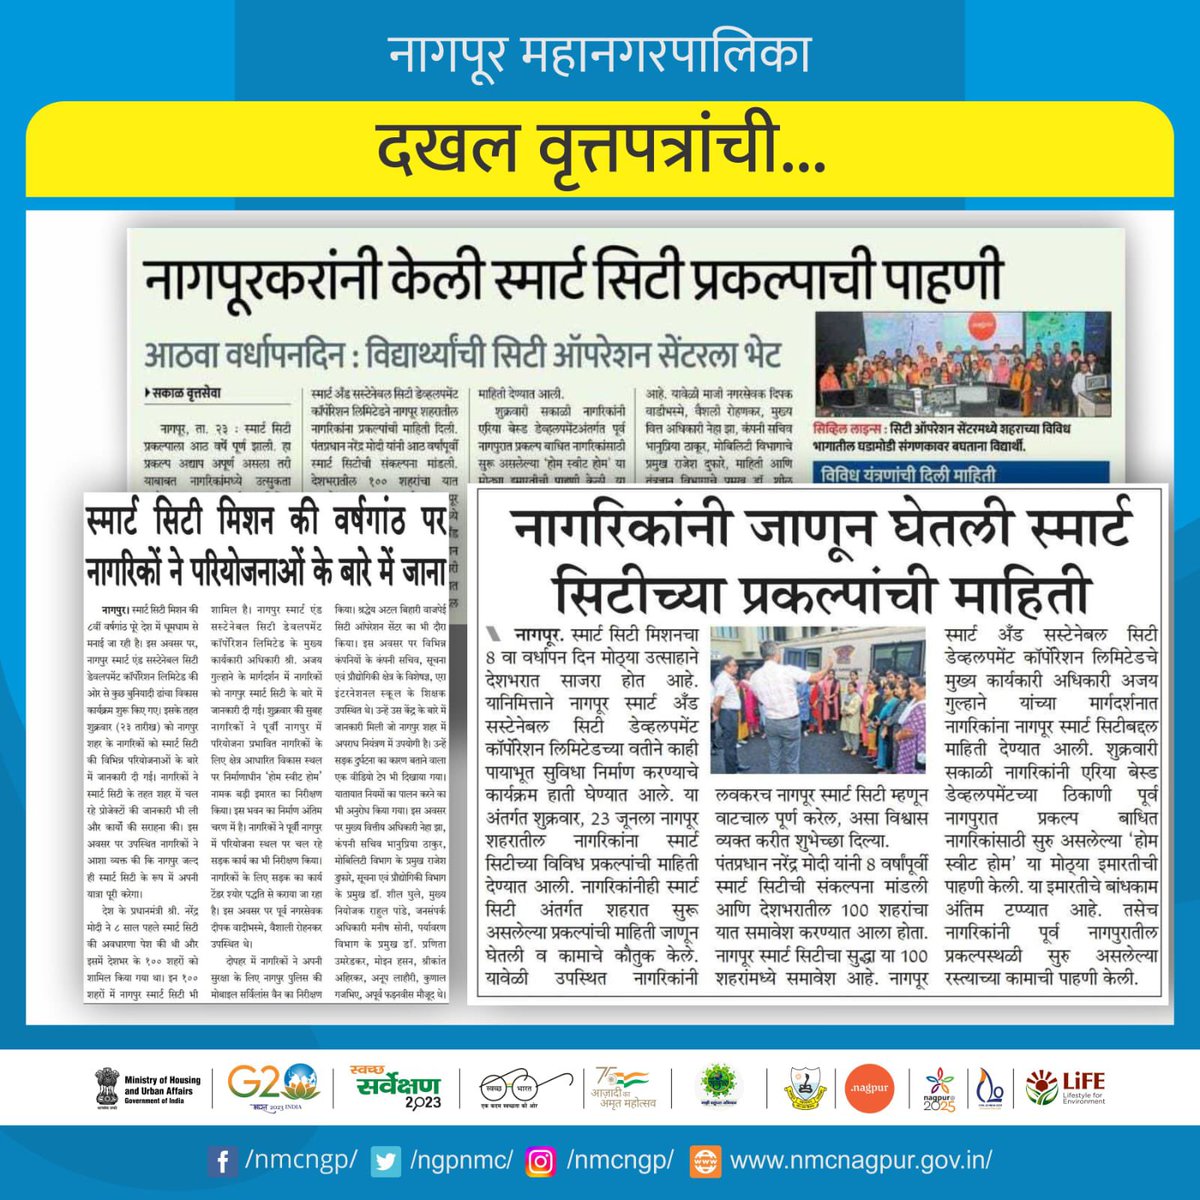 Nagpur Smart City organised public awareness events on the occasion 8th anniversary of Smart City Mission. The newspapers gave wide publicity to these events. 

#8saal
#SmartCity
#SabkaBharatNikhartaBharat